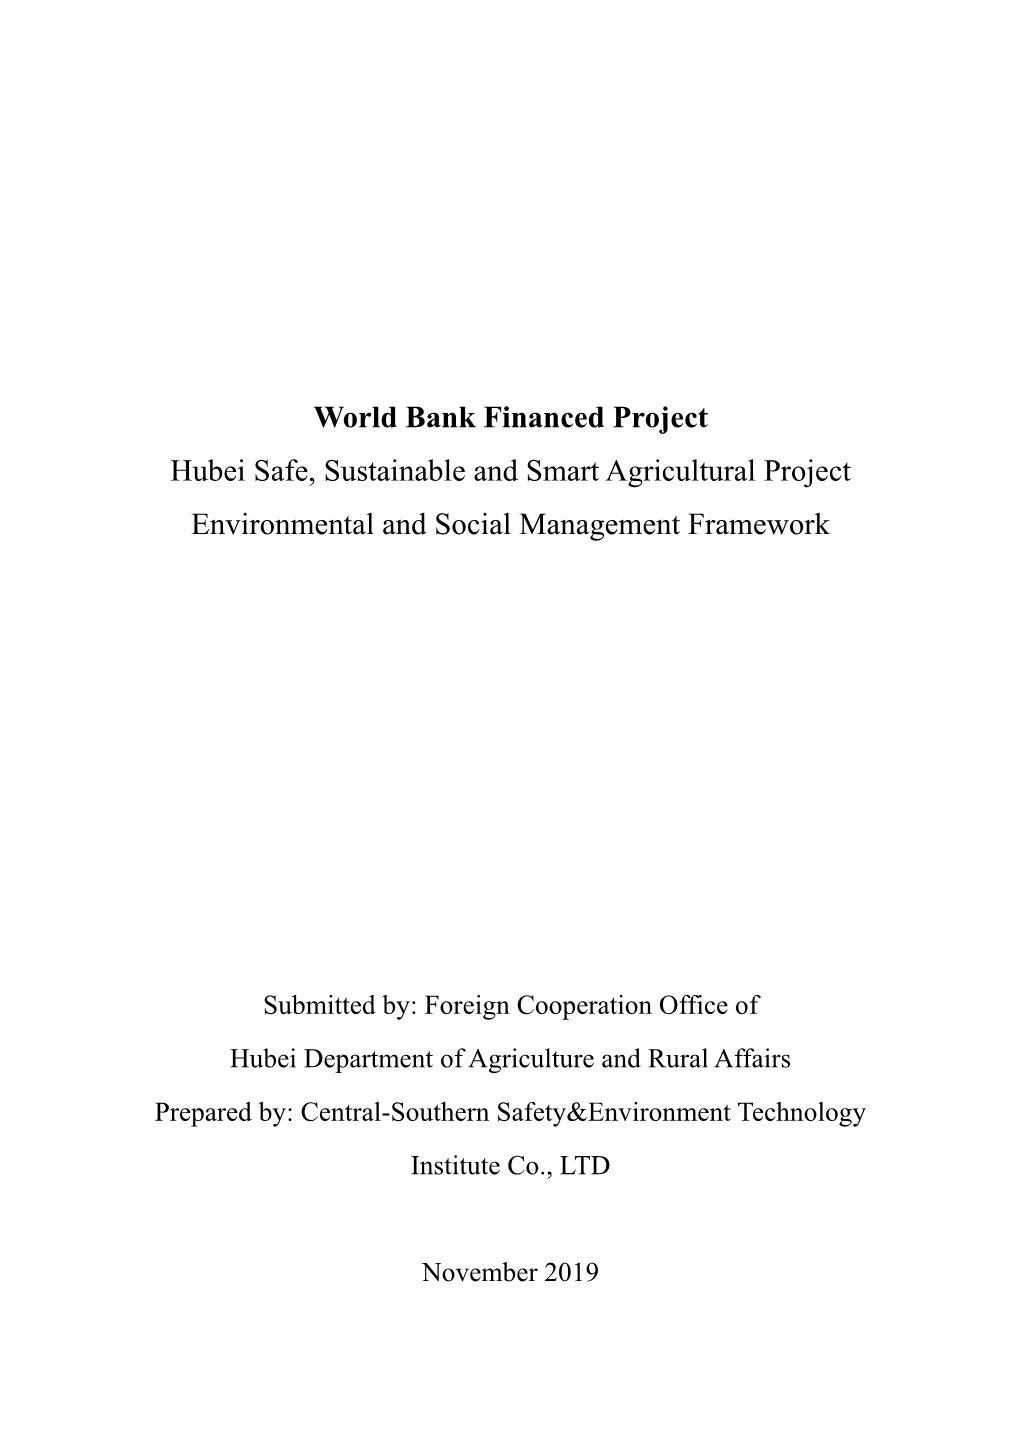 World Bank Financed Project Hubei Safe, Sustainable and Smart Agricultural Project Environmental and Social Management Framework